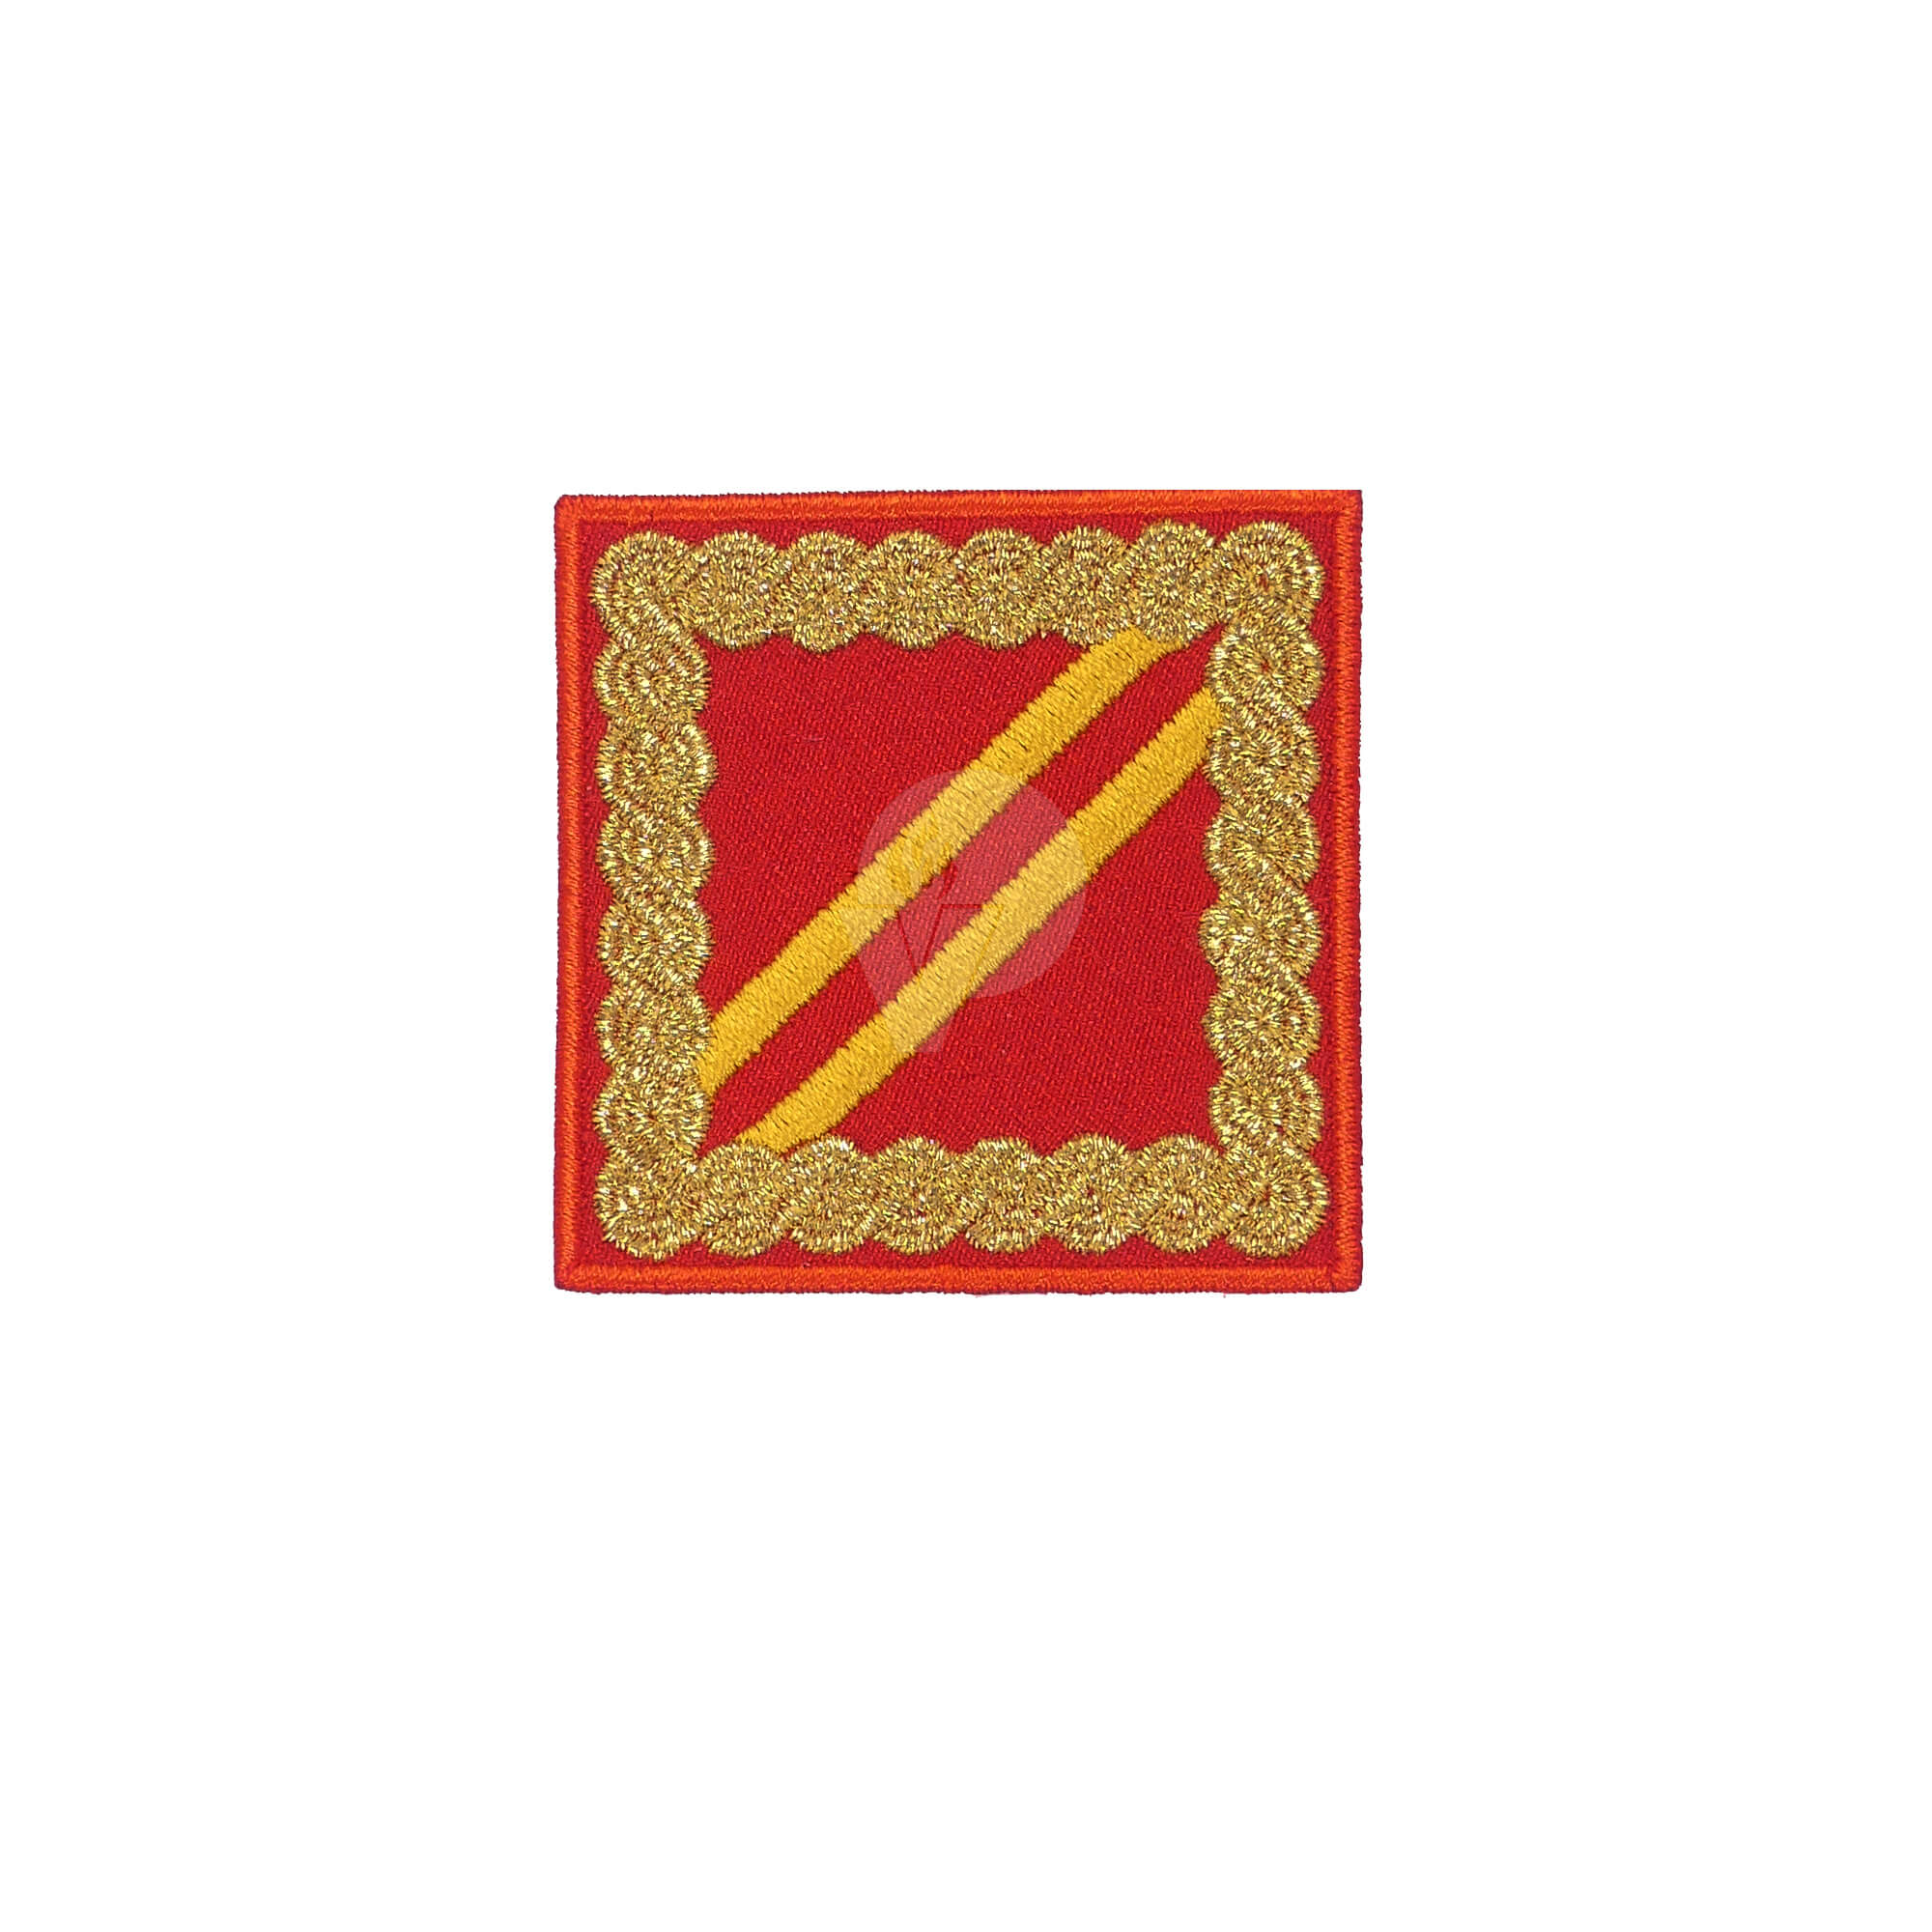 Mark for Professional Firefighter Workplace, Fire operative for technique and equipment, shift commander of the fire station